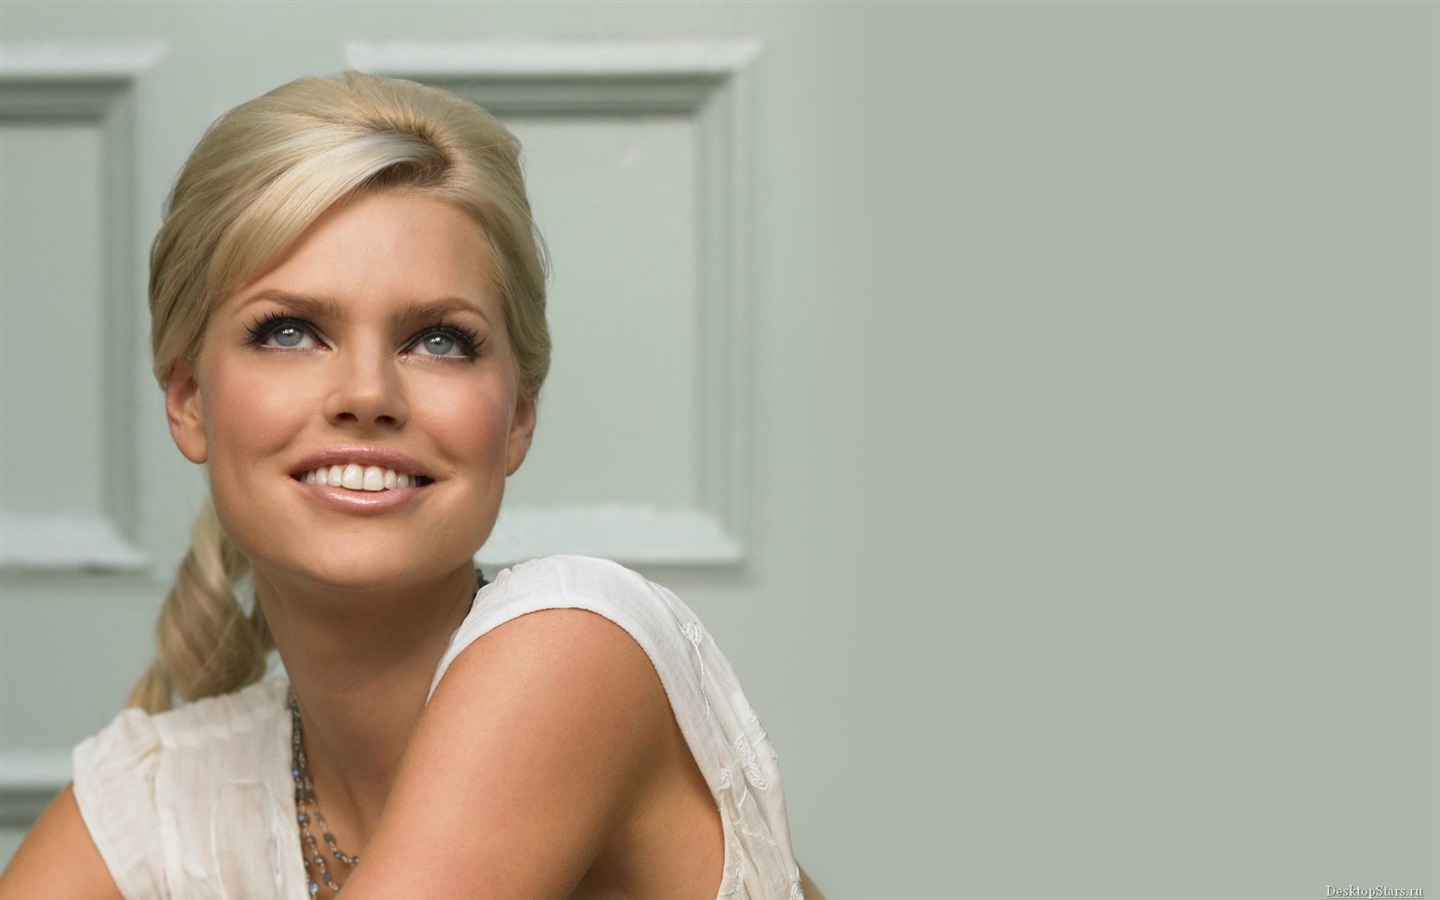 Sophie Monk #004 - 1440x900 Wallpapers Pictures Photos Images